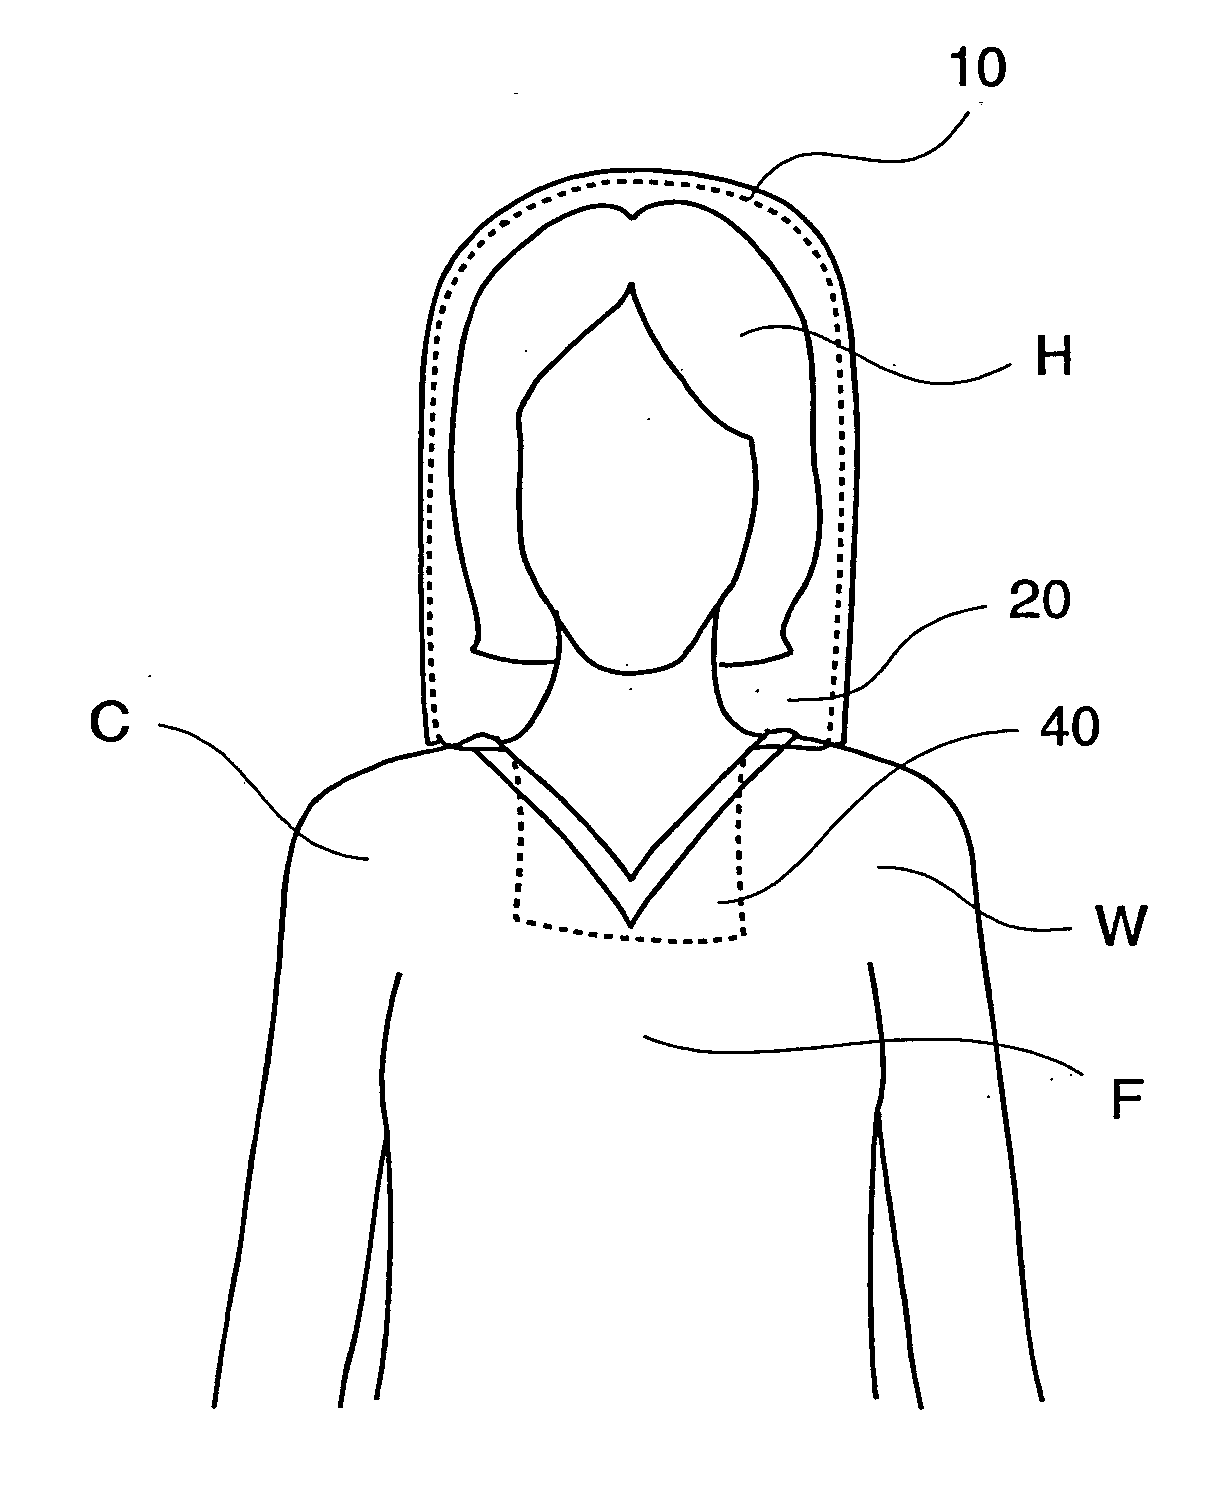 Garment protector and method of use thereof